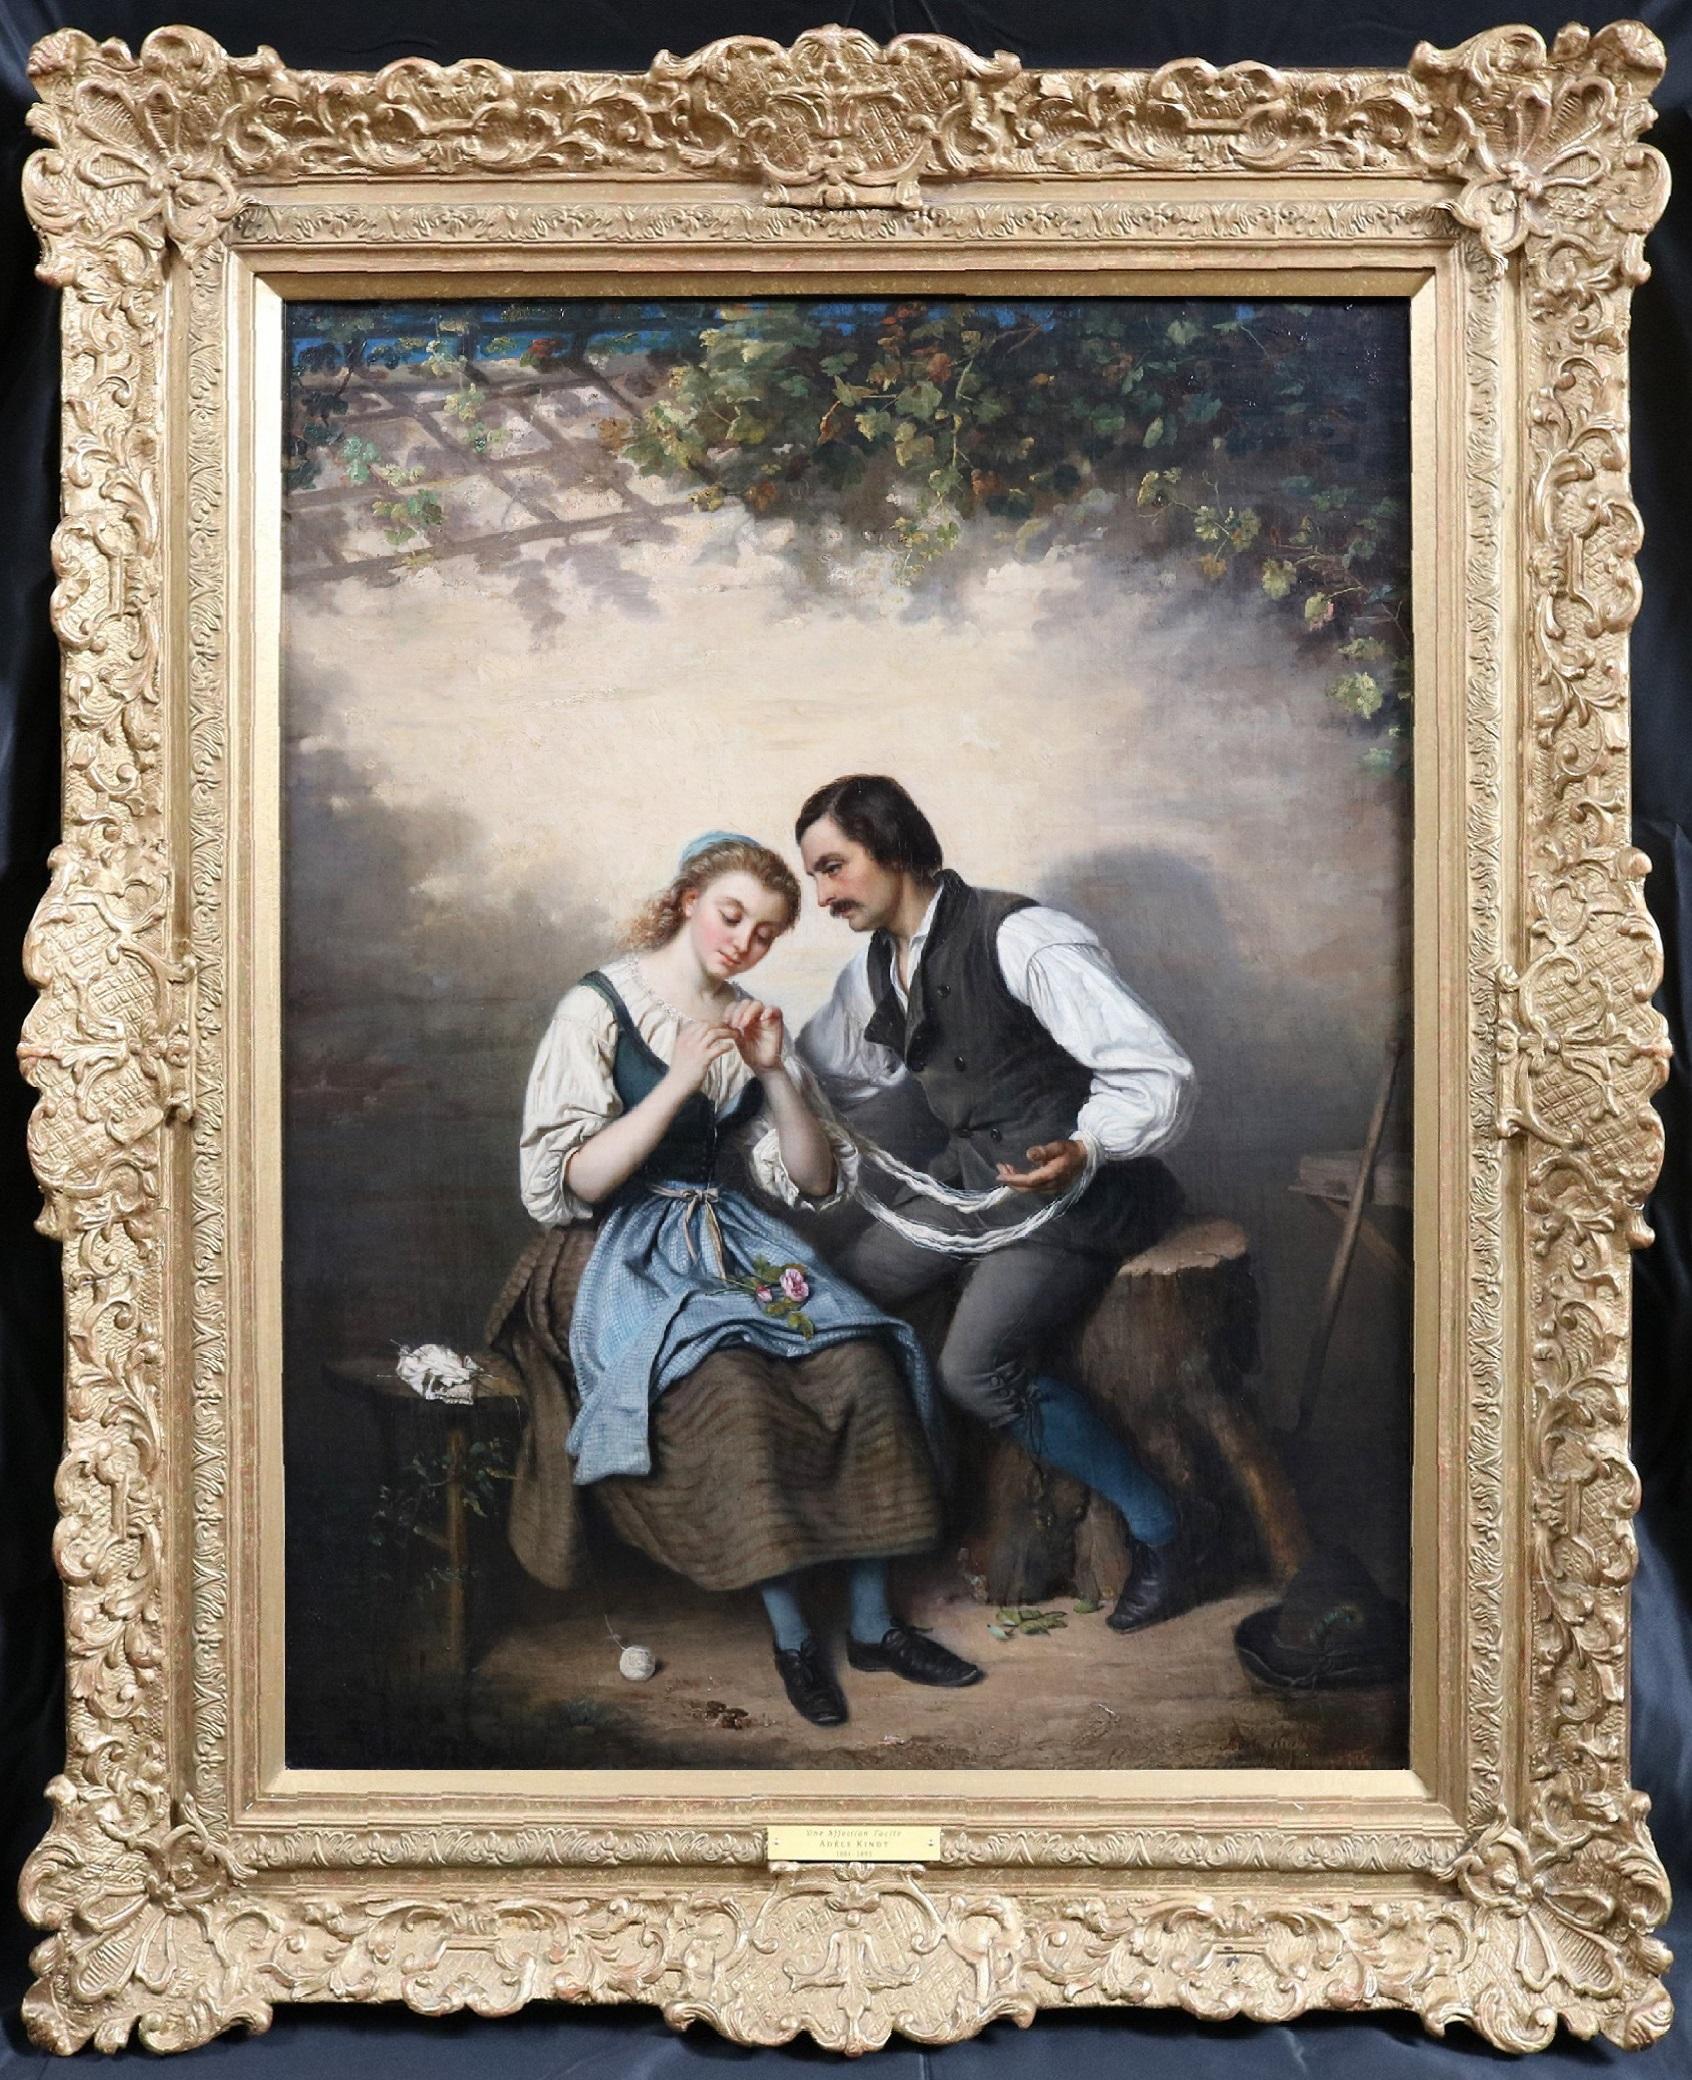 Une Affection Tacite - Large 19th Century Oil Painting of Young Lovers  - Brown Portrait Painting by Adèle Kindt